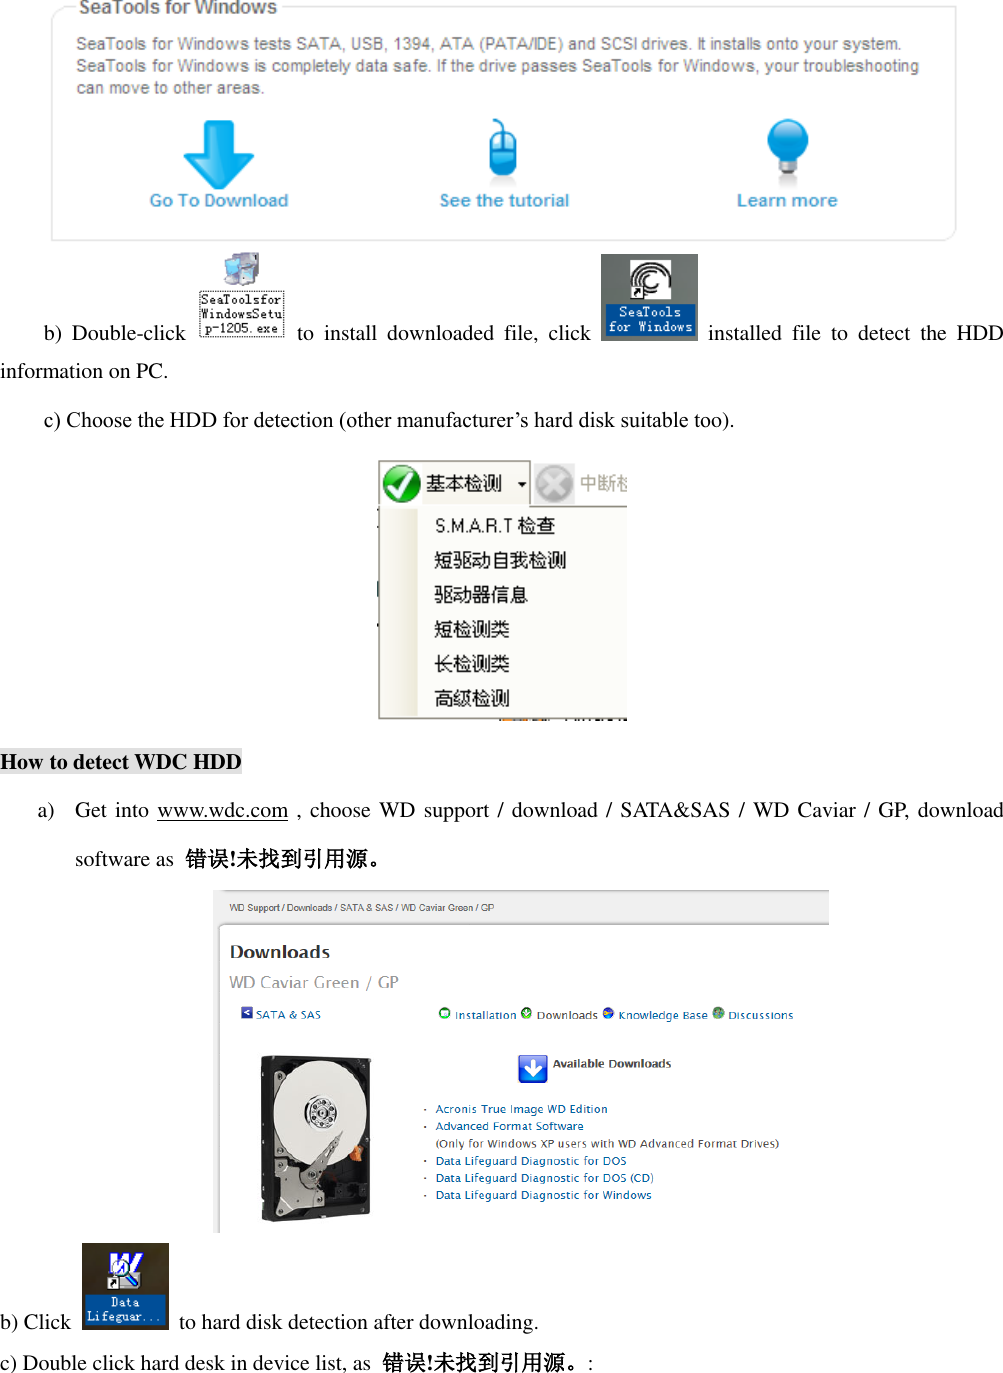  b)  Double-click   to  install  downloaded  file,  click    installed  file  to  detect  the  HDD information on PC. c) Choose the HDD for detection (other manufacturer’s hard disk suitable too).  How to detect WDC HDD a) Get into www.wdc.com , choose WD support / download / SATA&amp;SAS / WD Caviar / GP, download software as  错误!未找到引用源。  b) Click    to hard disk detection after downloading. c) Double click hard desk in device list, as  错误!未找到引用源。: 